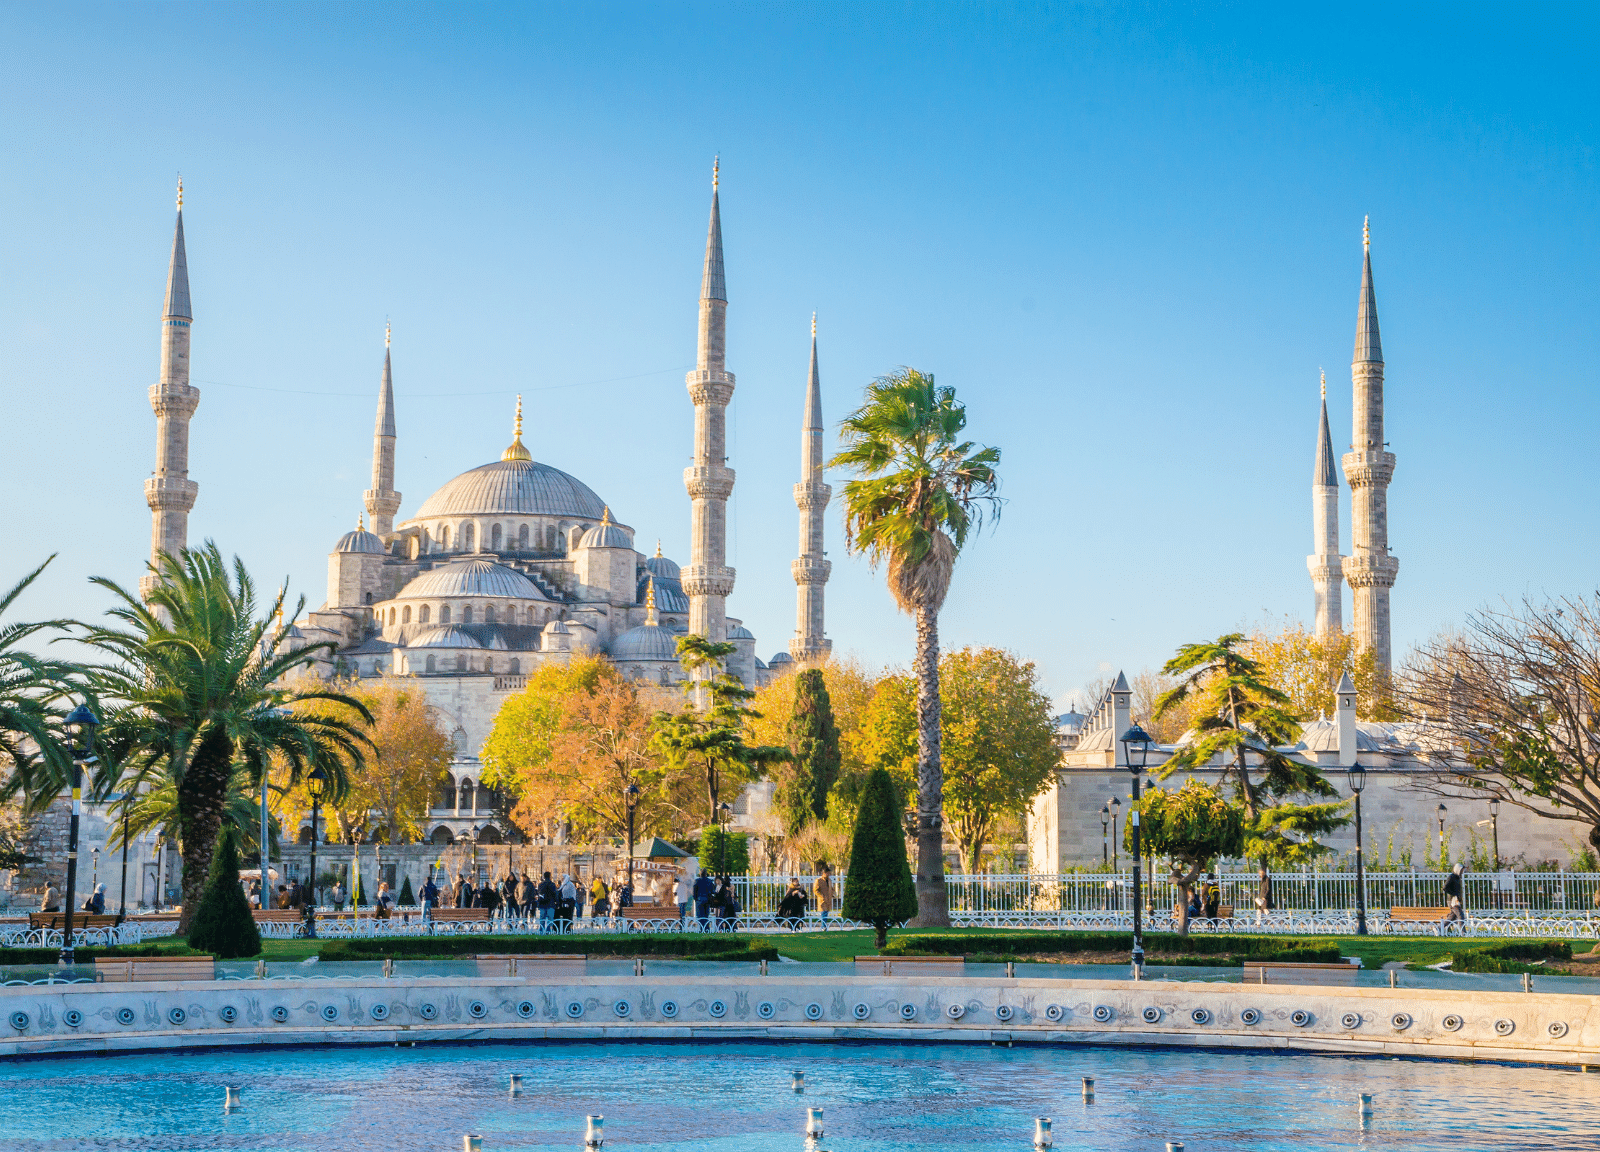 The Cultural Center of Istanbul: Sultanahmet